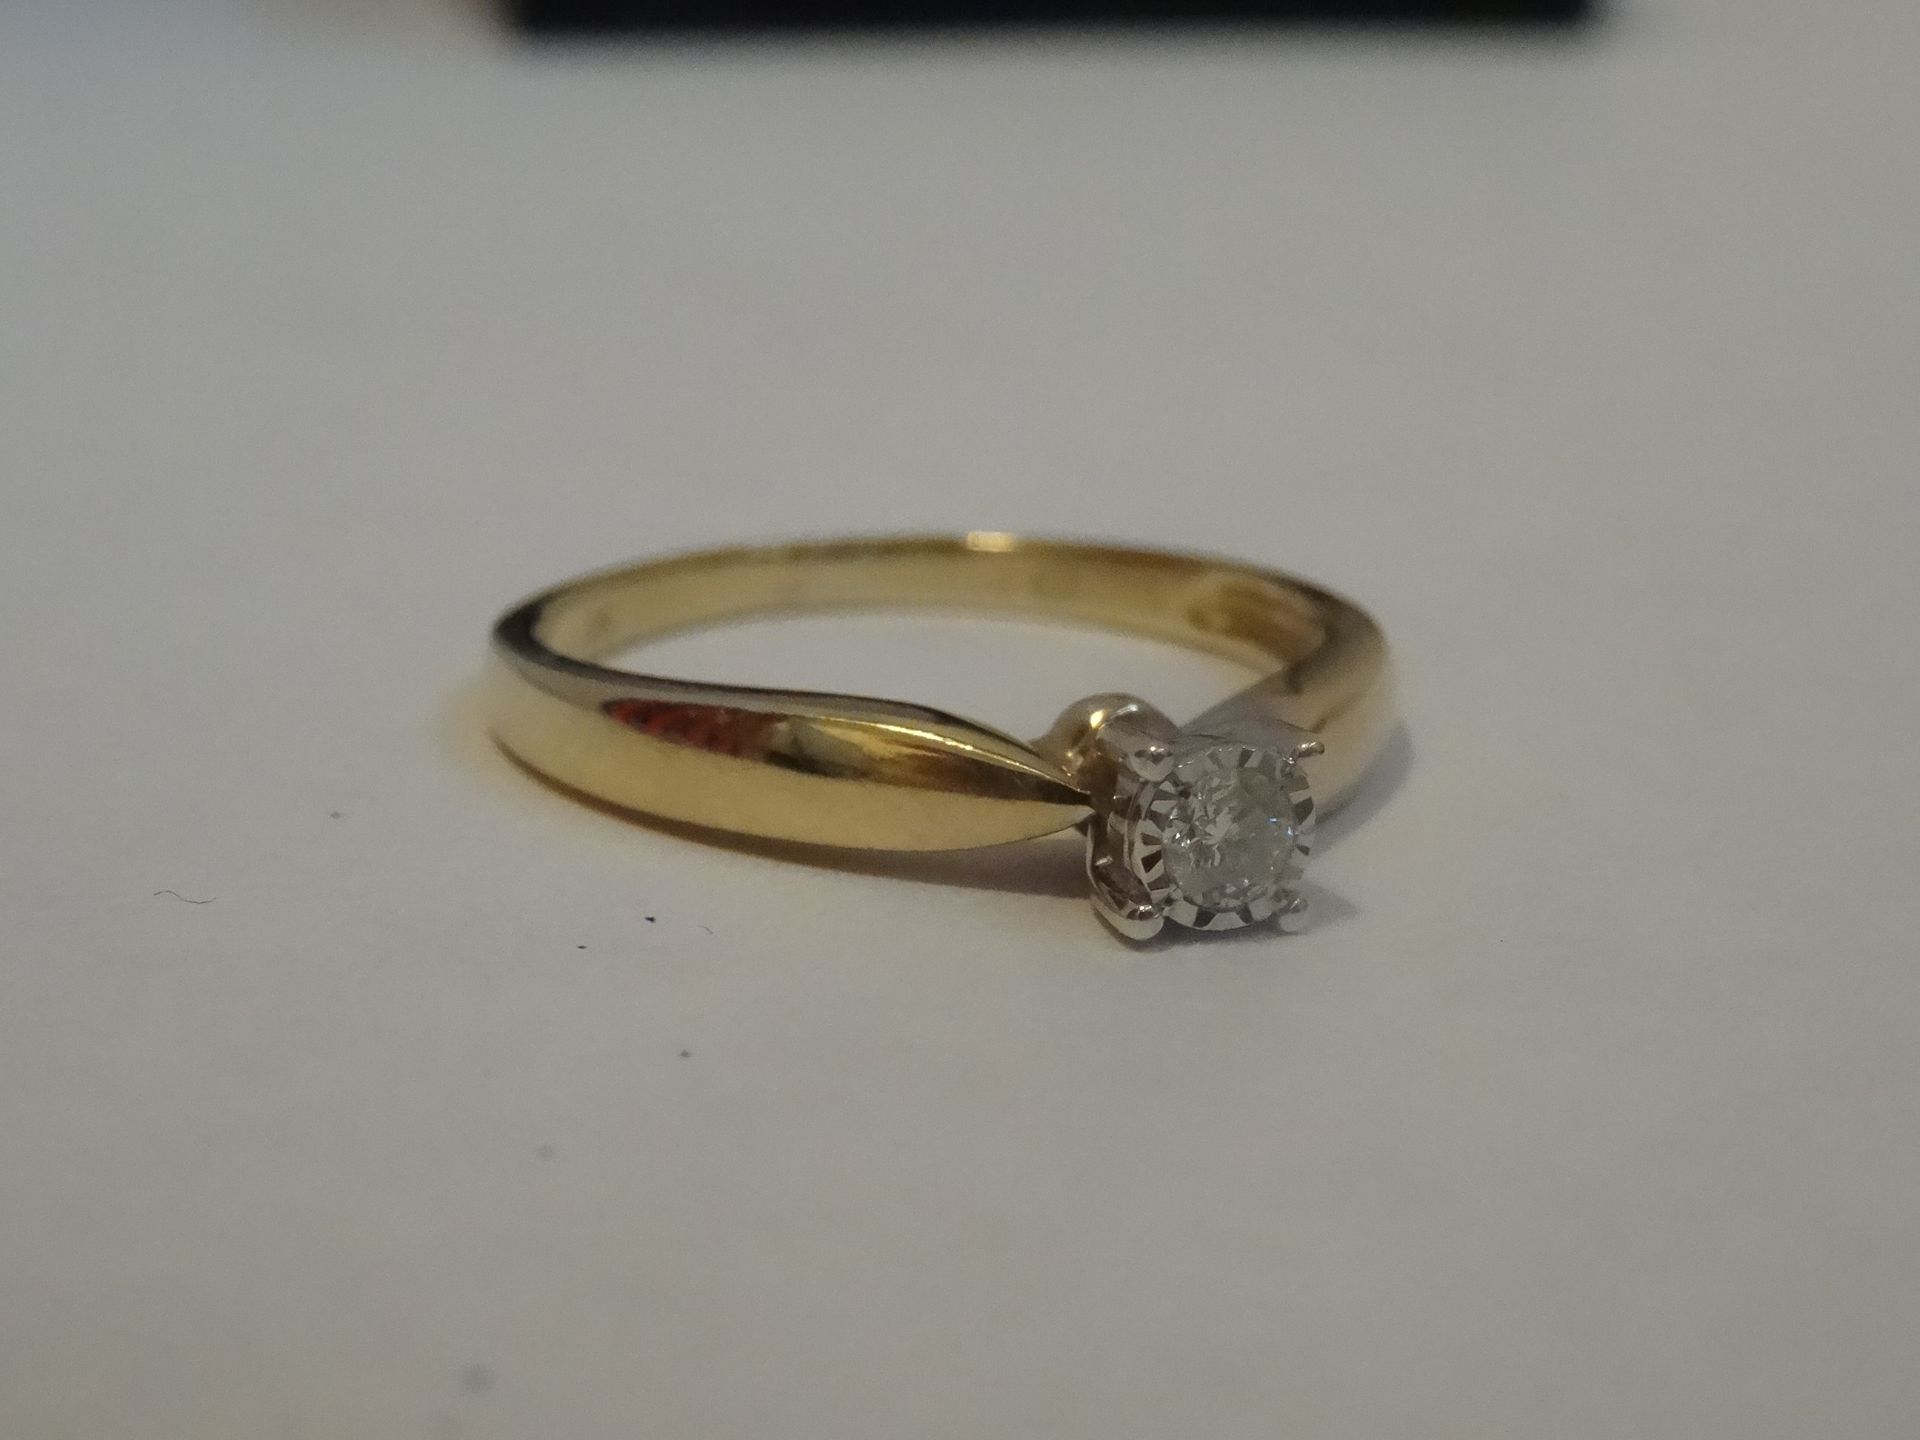 9 Carat Yellow & White Gold Single Stone Diamond Solitaire Ring. Total Piece Weigh 2.18 Grams - Image 3 of 3